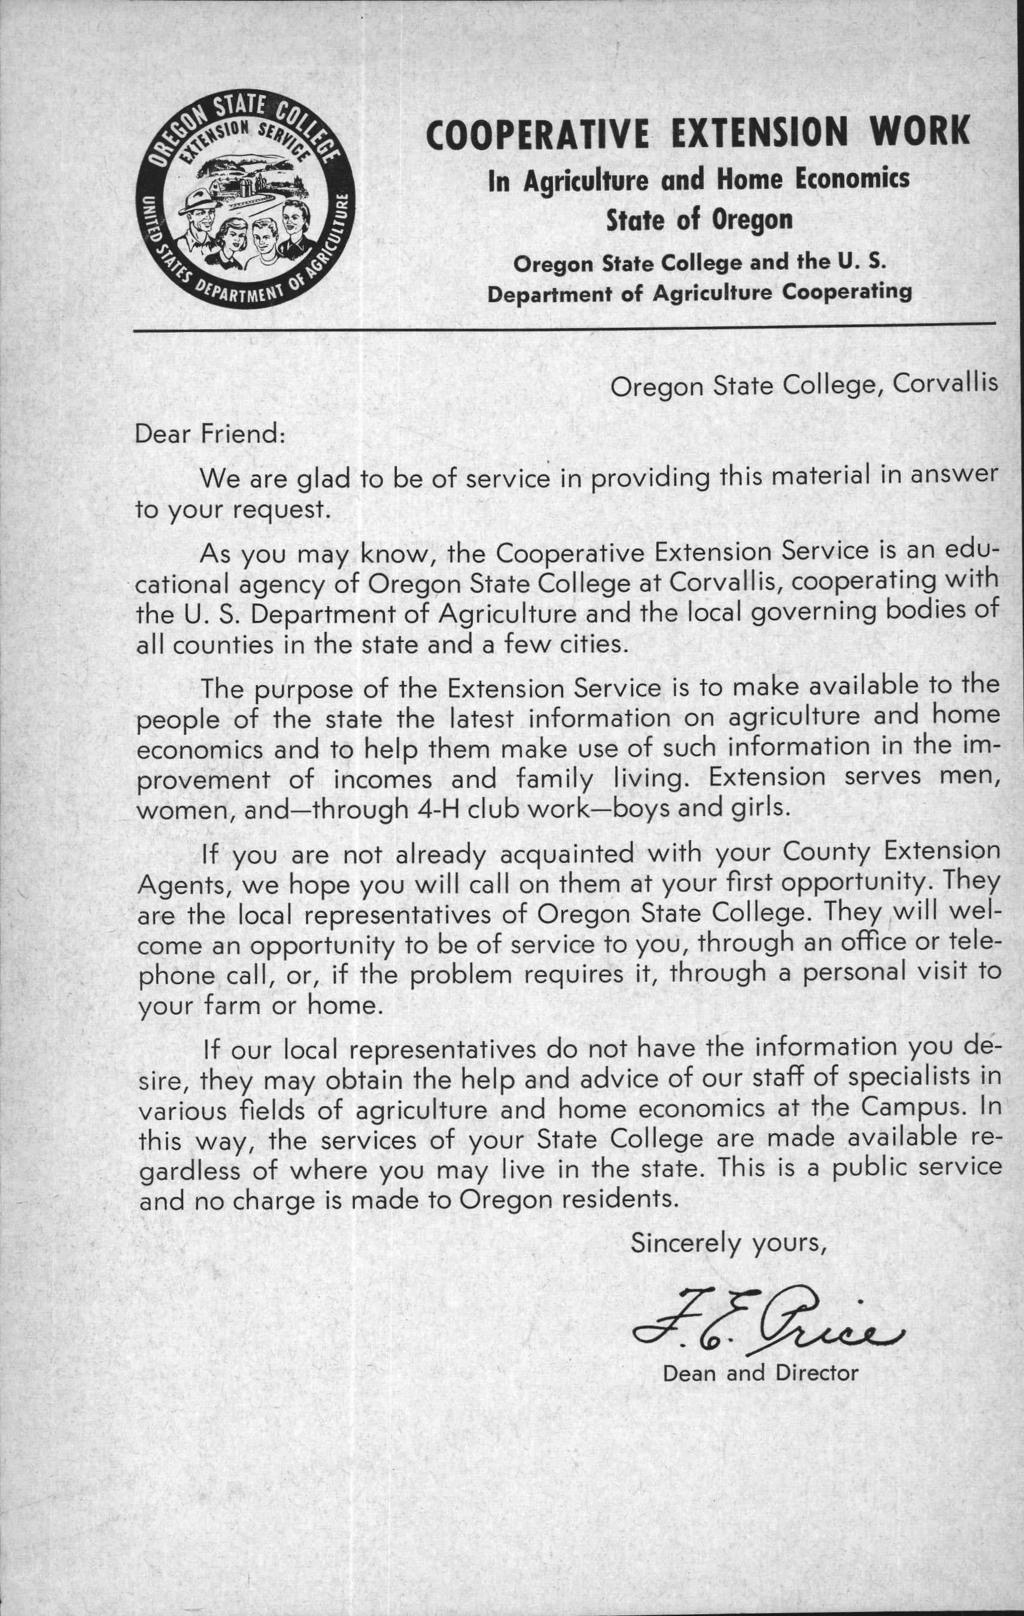 4ze. SIATE OH sio led COOPERATIVE EXTENSION WORK In Agriculture and Home Economics State of Oregon Oregon State College and the U. S. Department of Agriculture Cooperating Dear Friend: Oregon State College, Corvallis We are glad to be of service in providing this material in answer to your request.